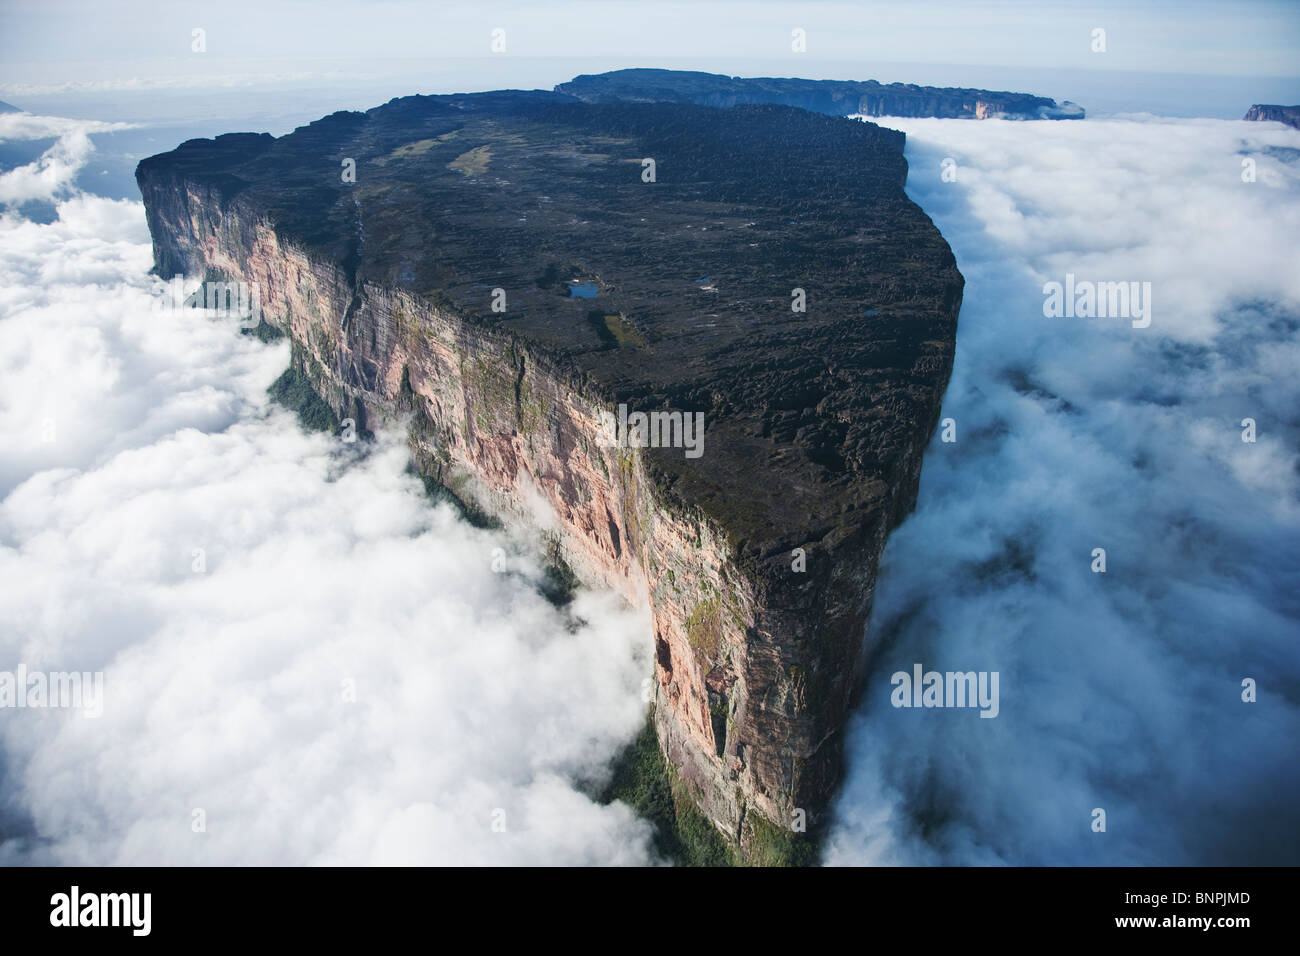 Mount Roraima is the highest tepui reaching 2810 meters in elevation. Cloud covered flat top mountains. Venezuela Stock Photo